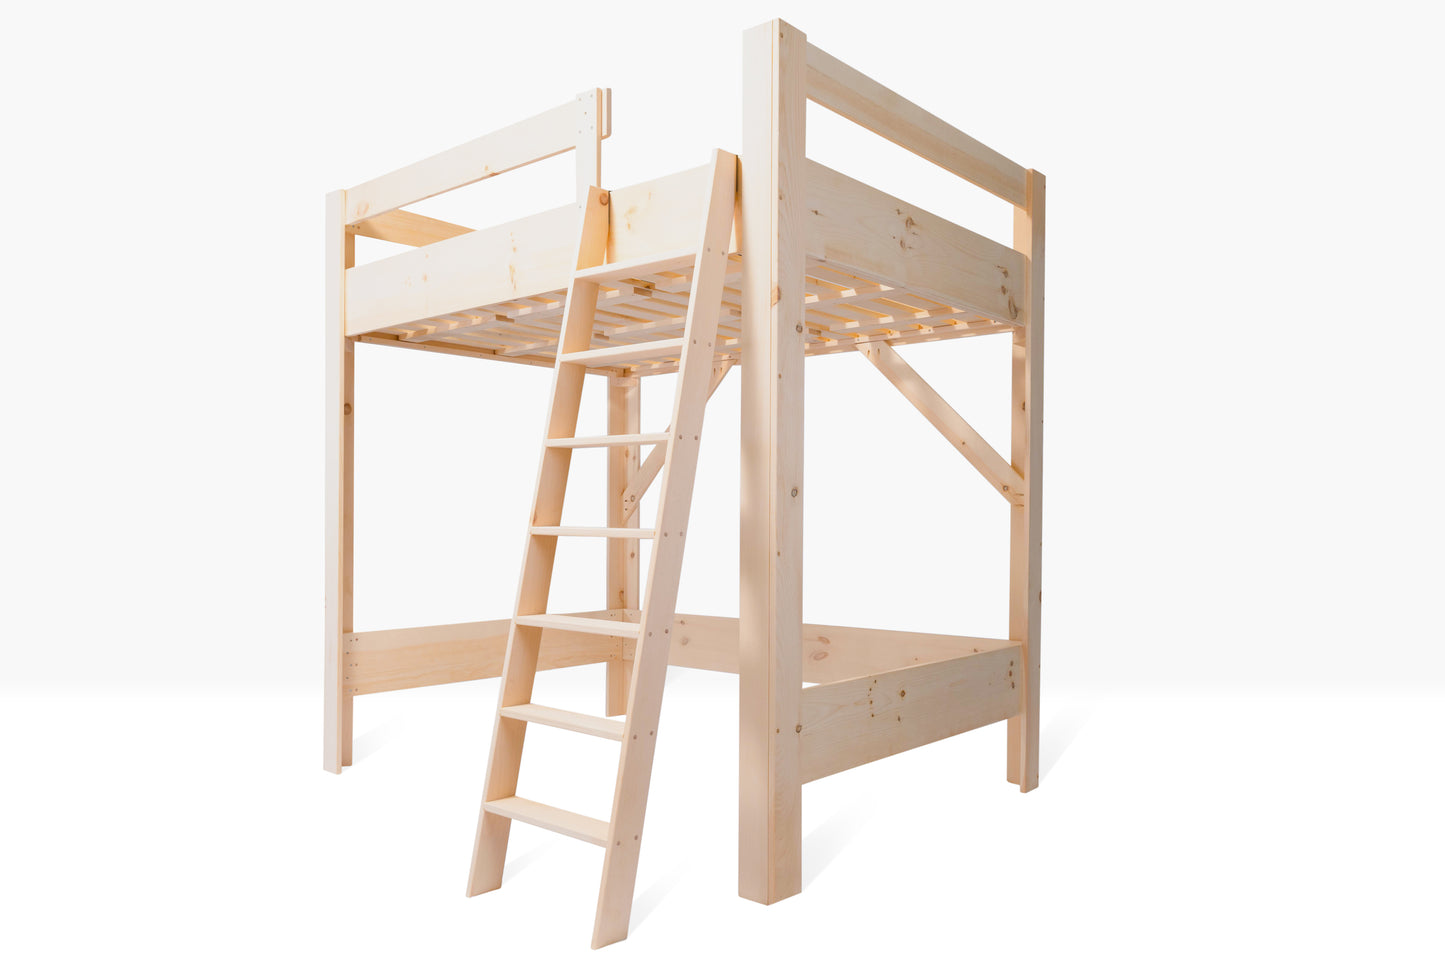 Evergreen Loft bed shown in full size from angle to show details of construction. Made from unfinished white pine.